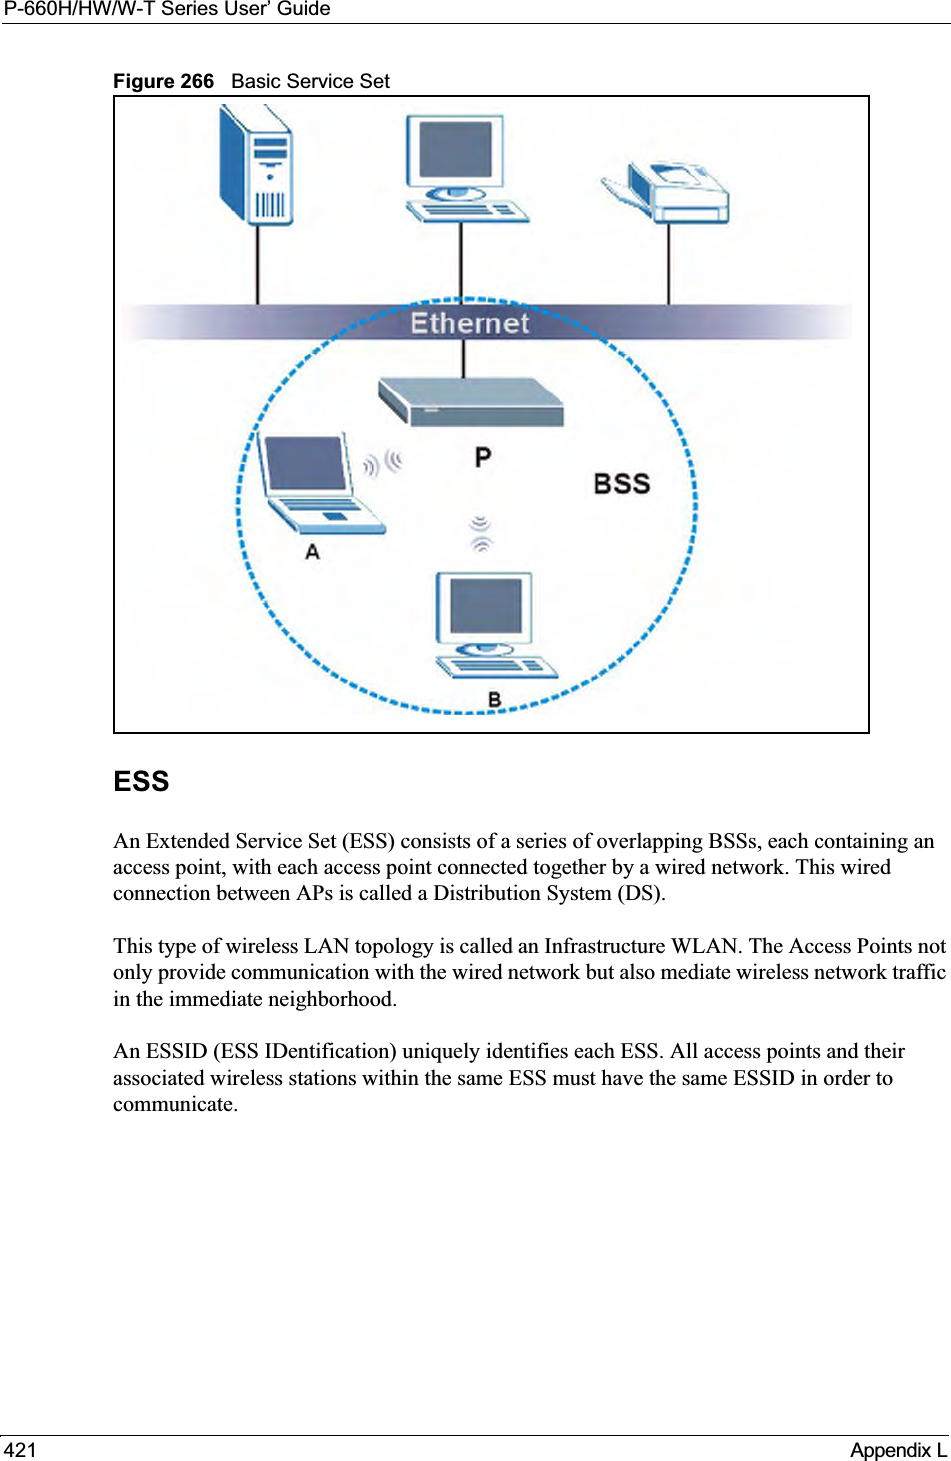 P-660H/HW/W-T Series User’ Guide421 Appendix LFigure 266   Basic Service SetESSAn Extended Service Set (ESS) consists of a series of overlapping BSSs, each containing an access point, with each access point connected together by a wired network. This wired connection between APs is called a Distribution System (DS).This type of wireless LAN topology is called an Infrastructure WLAN. The Access Points not only provide communication with the wired network but also mediate wireless network traffic in the immediate neighborhood. An ESSID (ESS IDentification) uniquely identifies each ESS. All access points and their associated wireless stations within the same ESS must have the same ESSID in order to communicate.